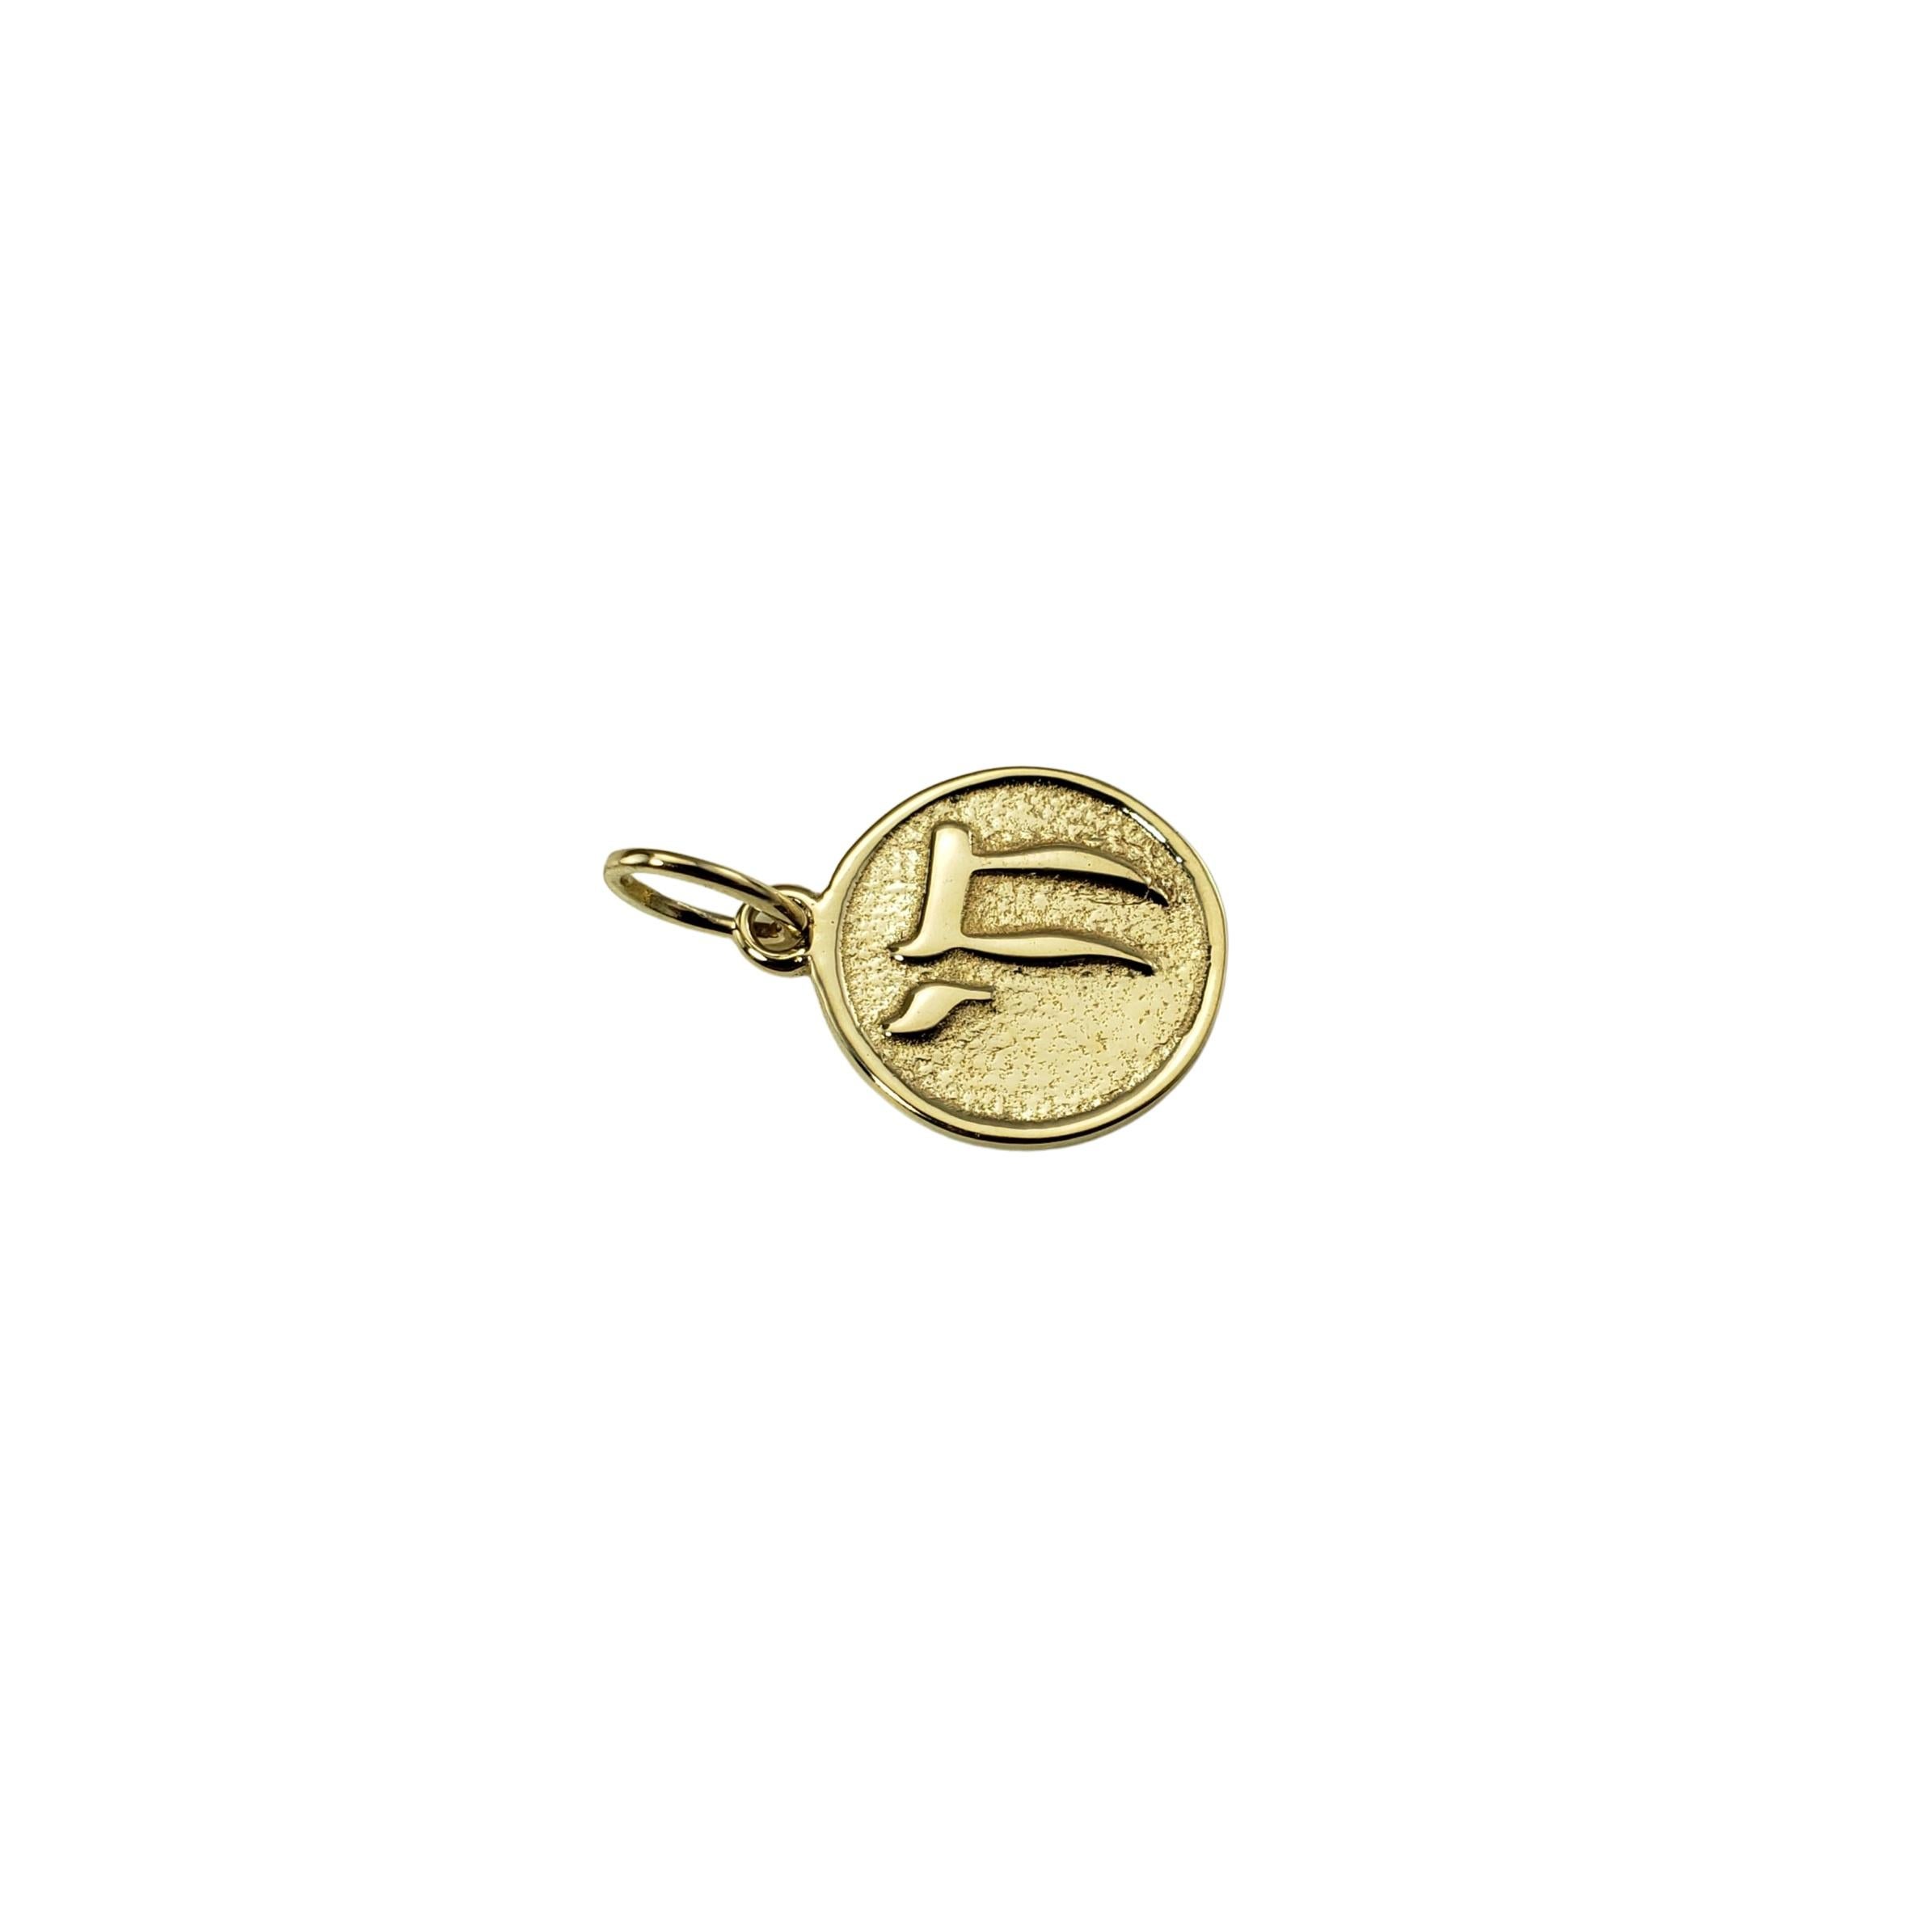 14 Karat Yellow Gold Chai Symbol Pendant-

This lovely pendant features the chai symbol meticulously detailed in 14K yellow gold

*Chain not included.

Size: 14 mm x 11 mm

Weight:  dwt. /  gr.

Stamped: 14K 

Very good condition, professionally